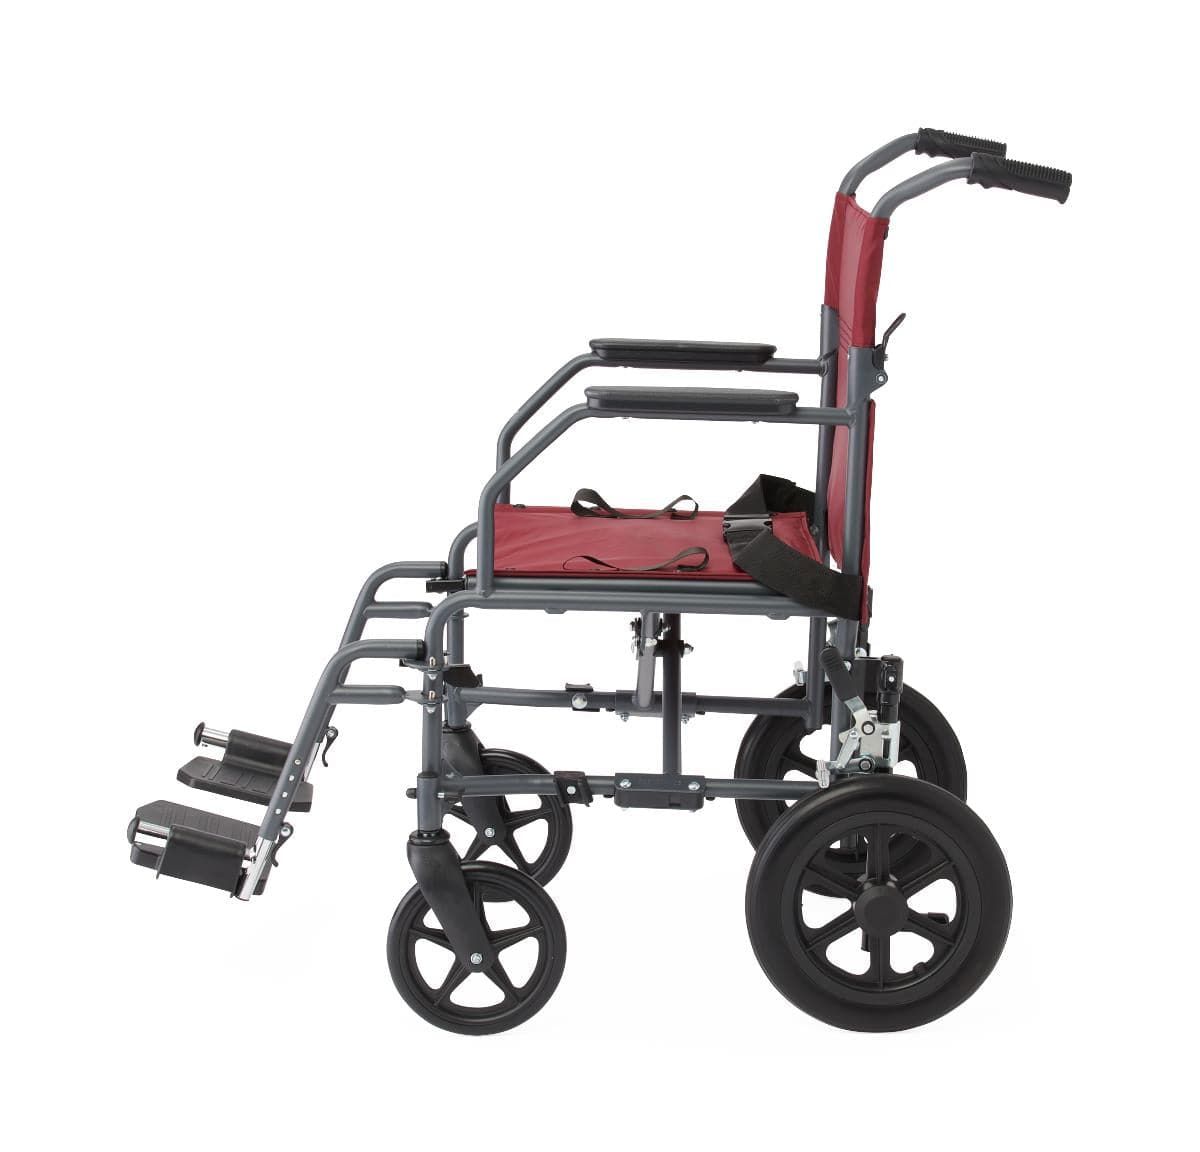 Medline Basic Steel Folding Transport Chair with 12" Wheels - Gray and Burgundy - Senior.com Transport Chairs